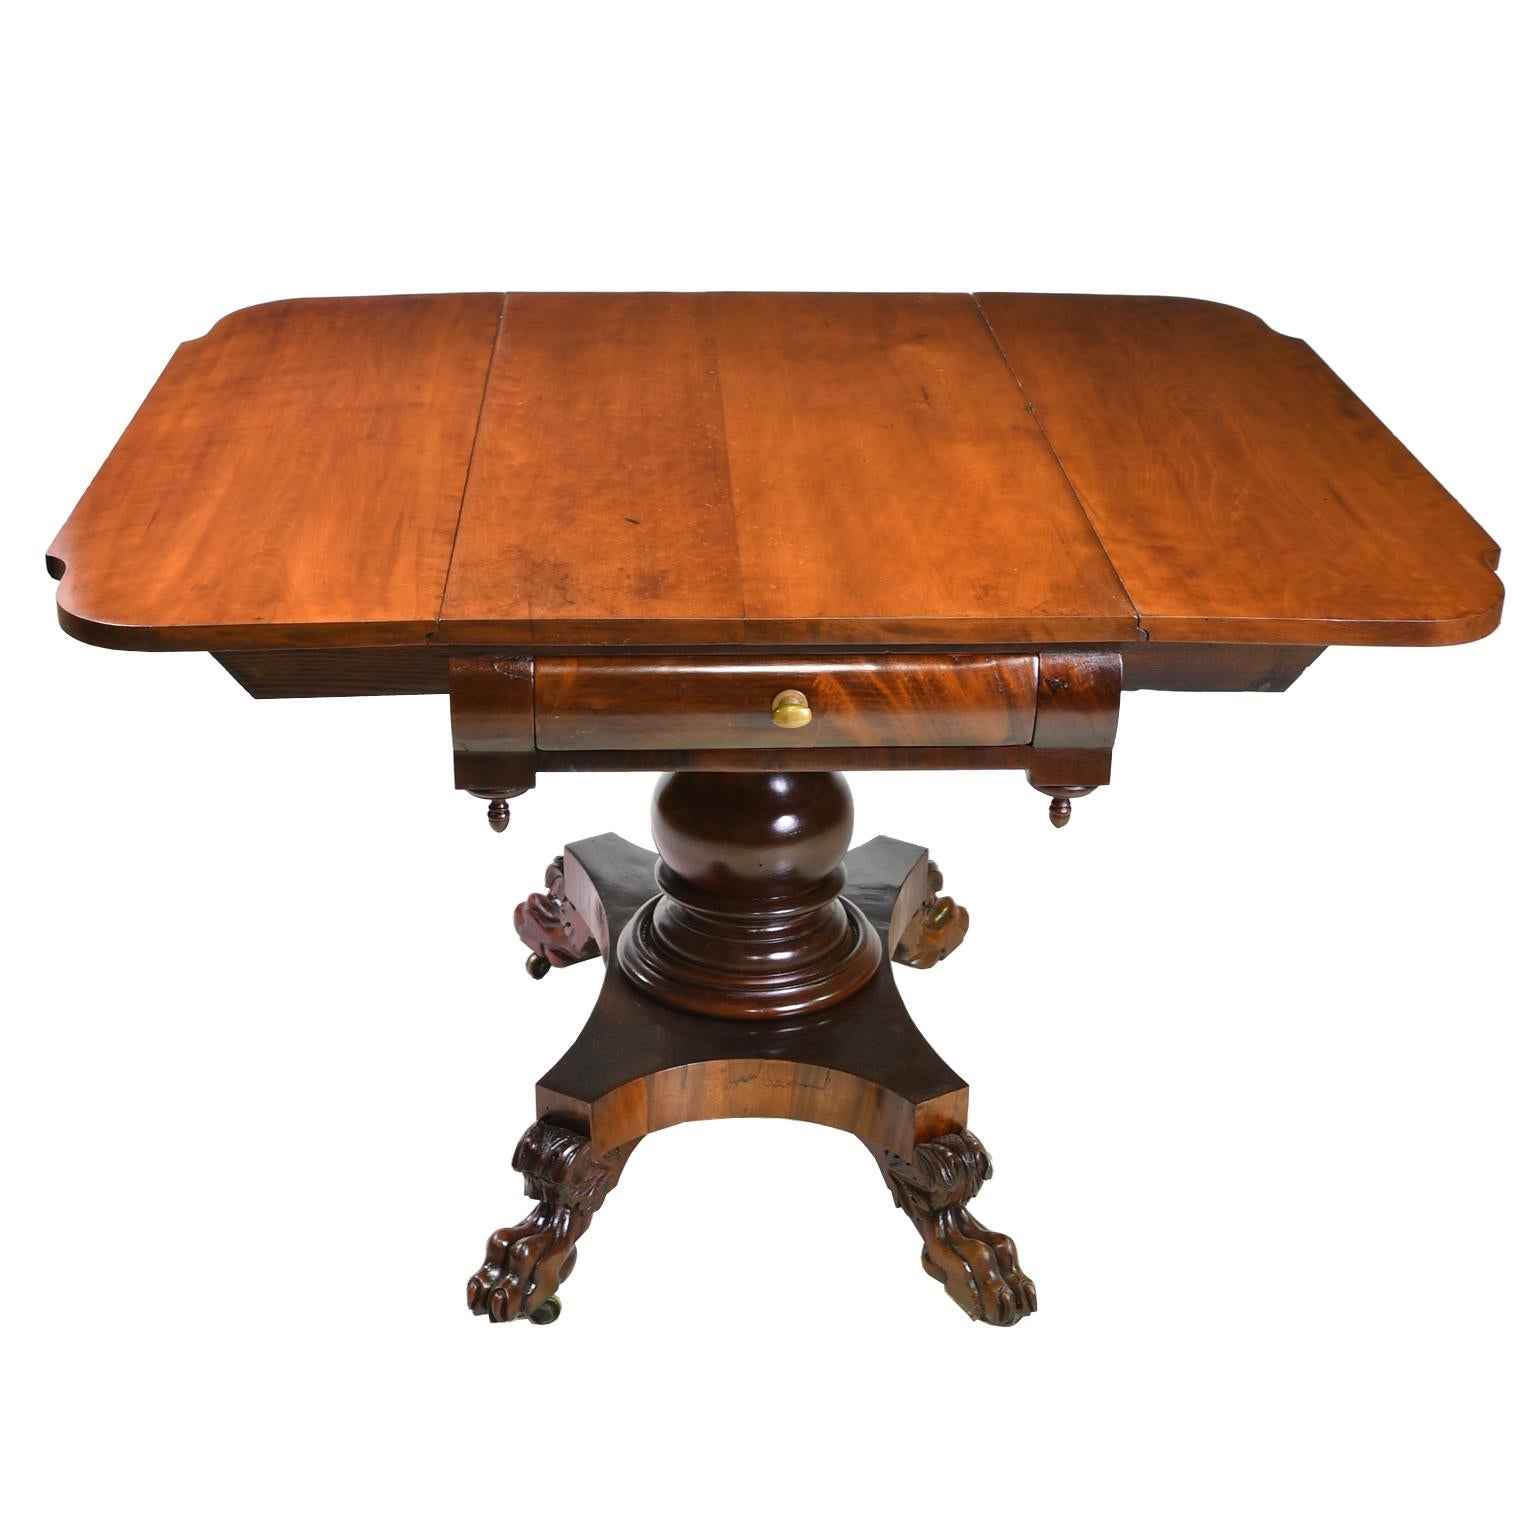 Brass Early American Empire Drop-Leaf/ Pembroke Table in West Indies Mahogany, c. 1830 For Sale